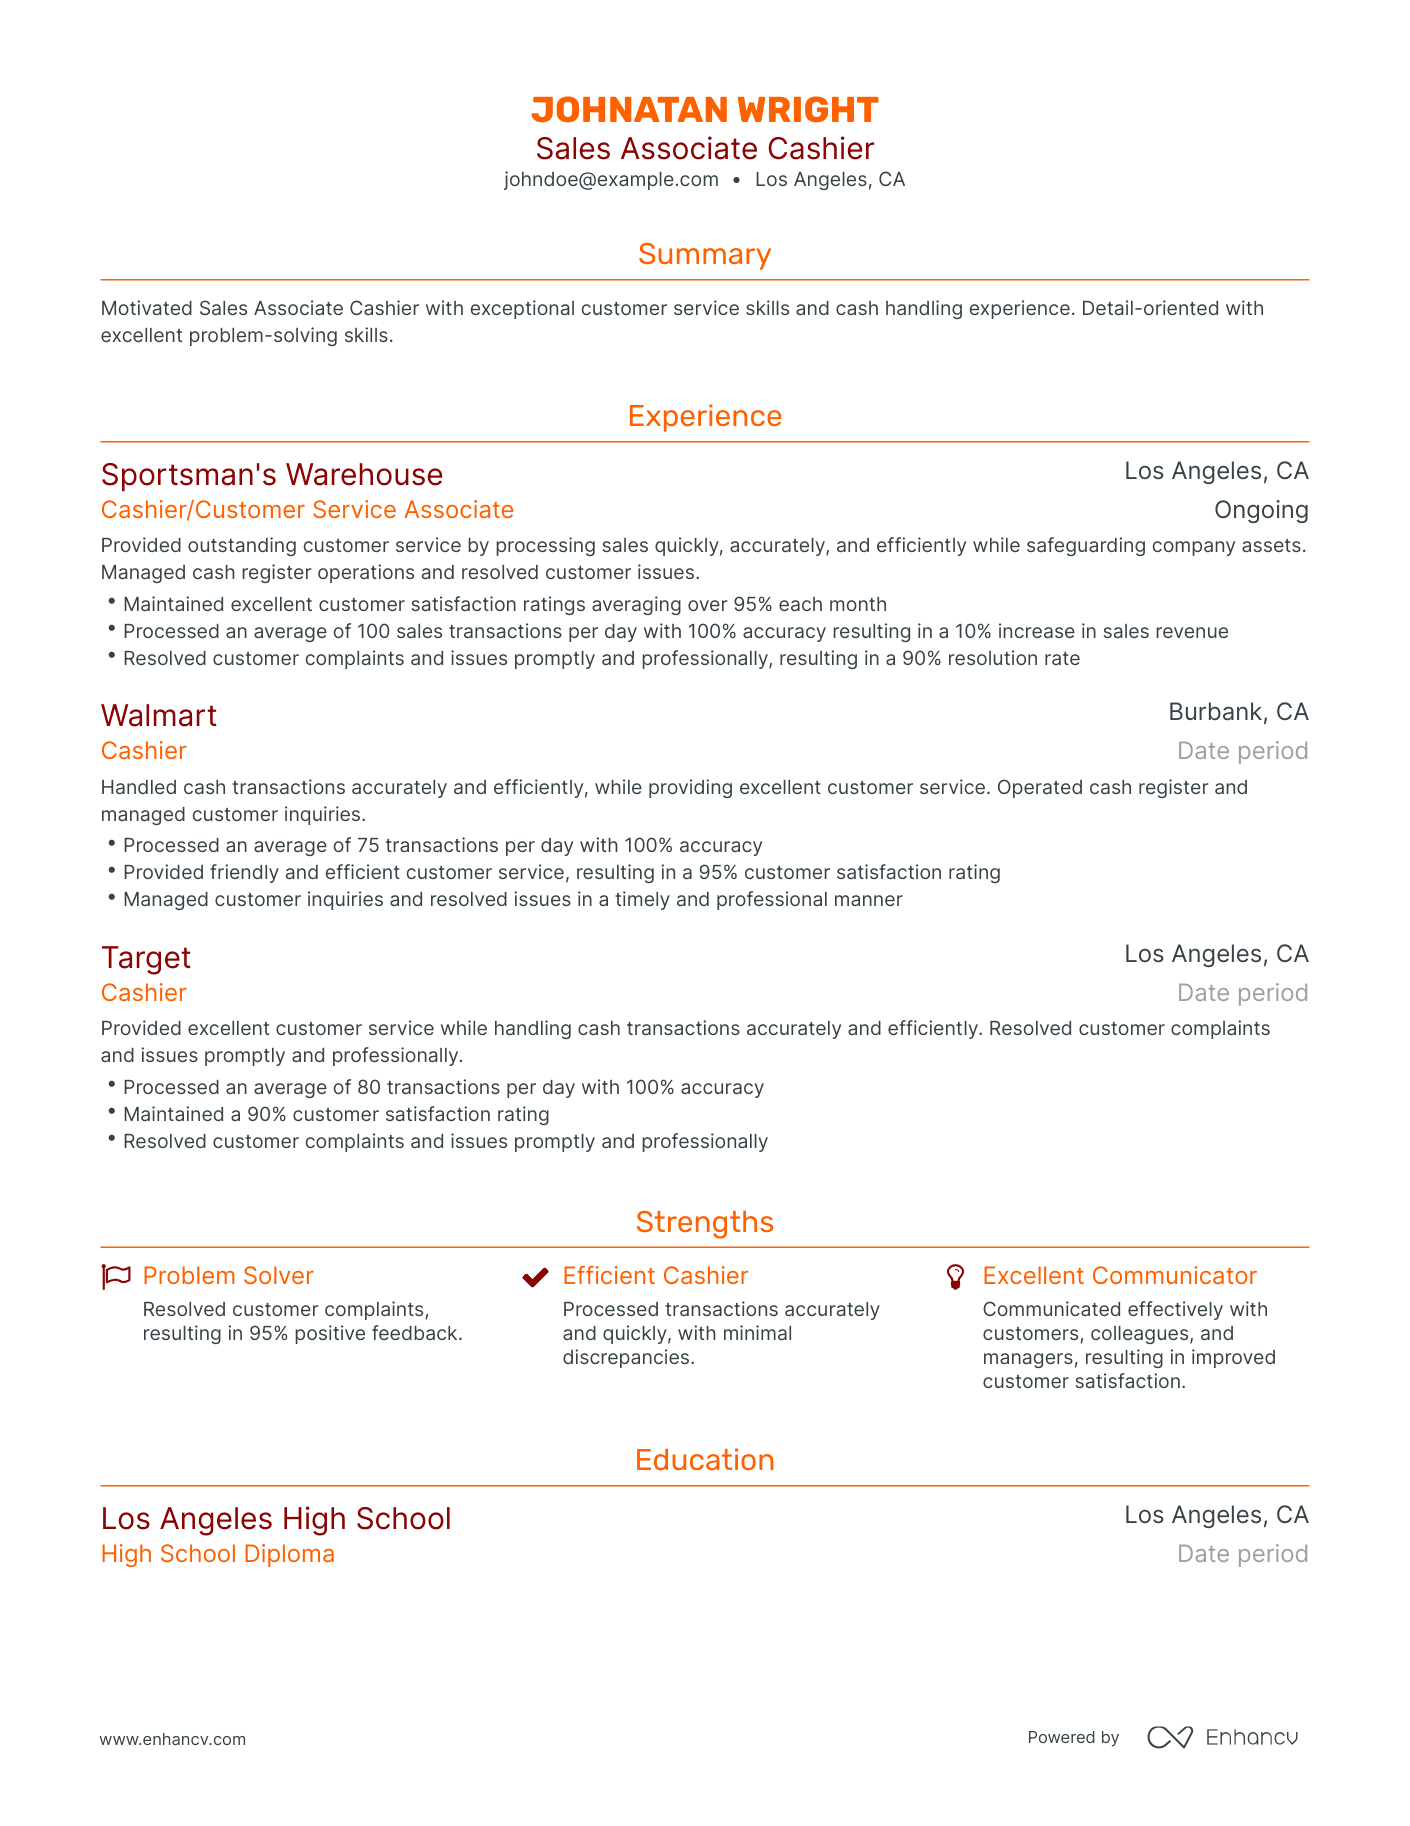 Traditional Sales Associate Cashier Resume Template